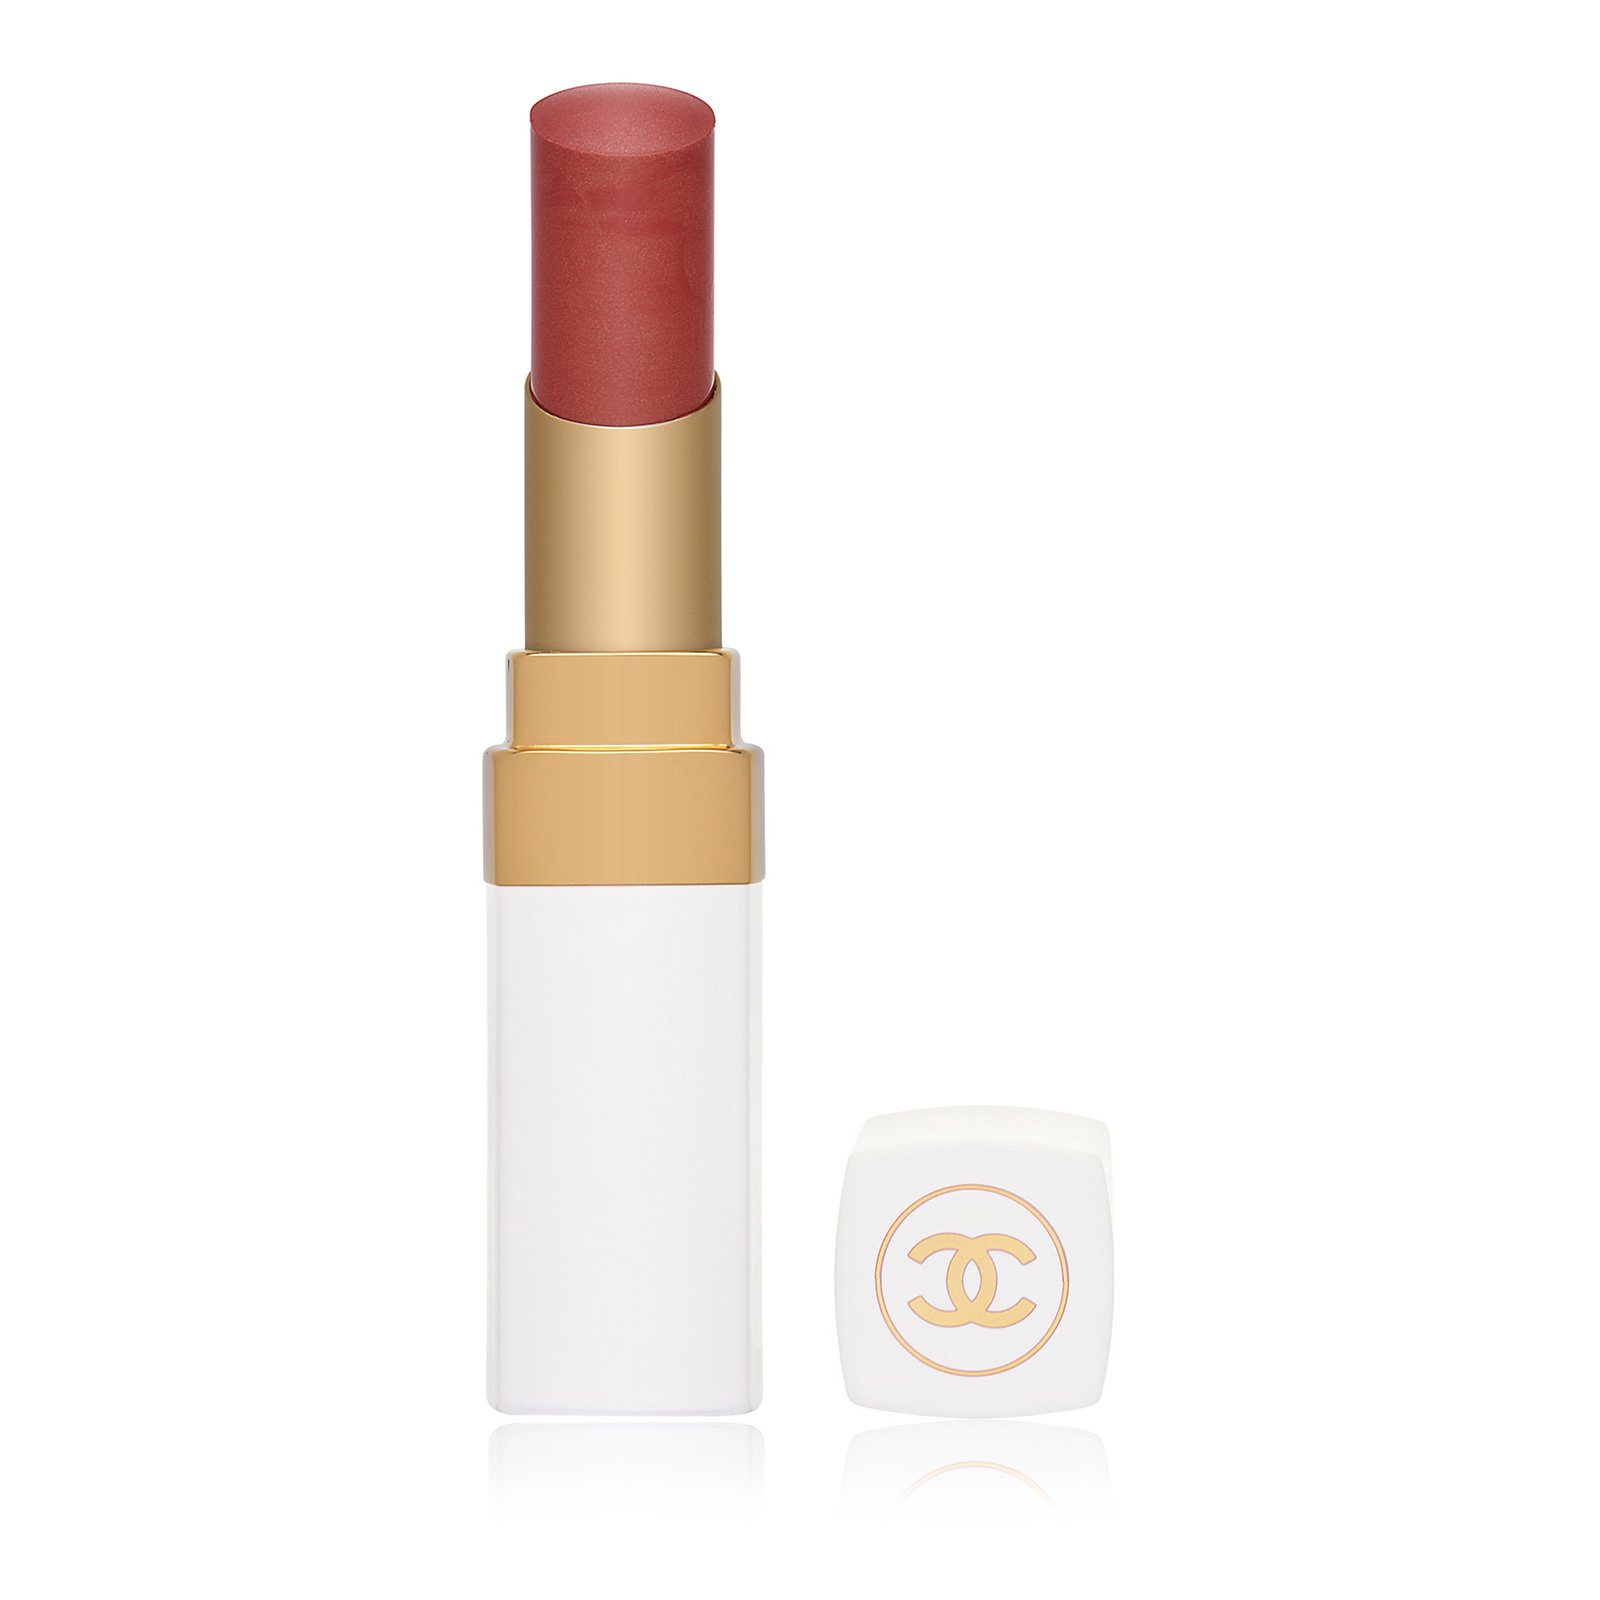 Chanel Rouge Coco Baume Hydrating Beautifying Tinted Lip Balm0.1